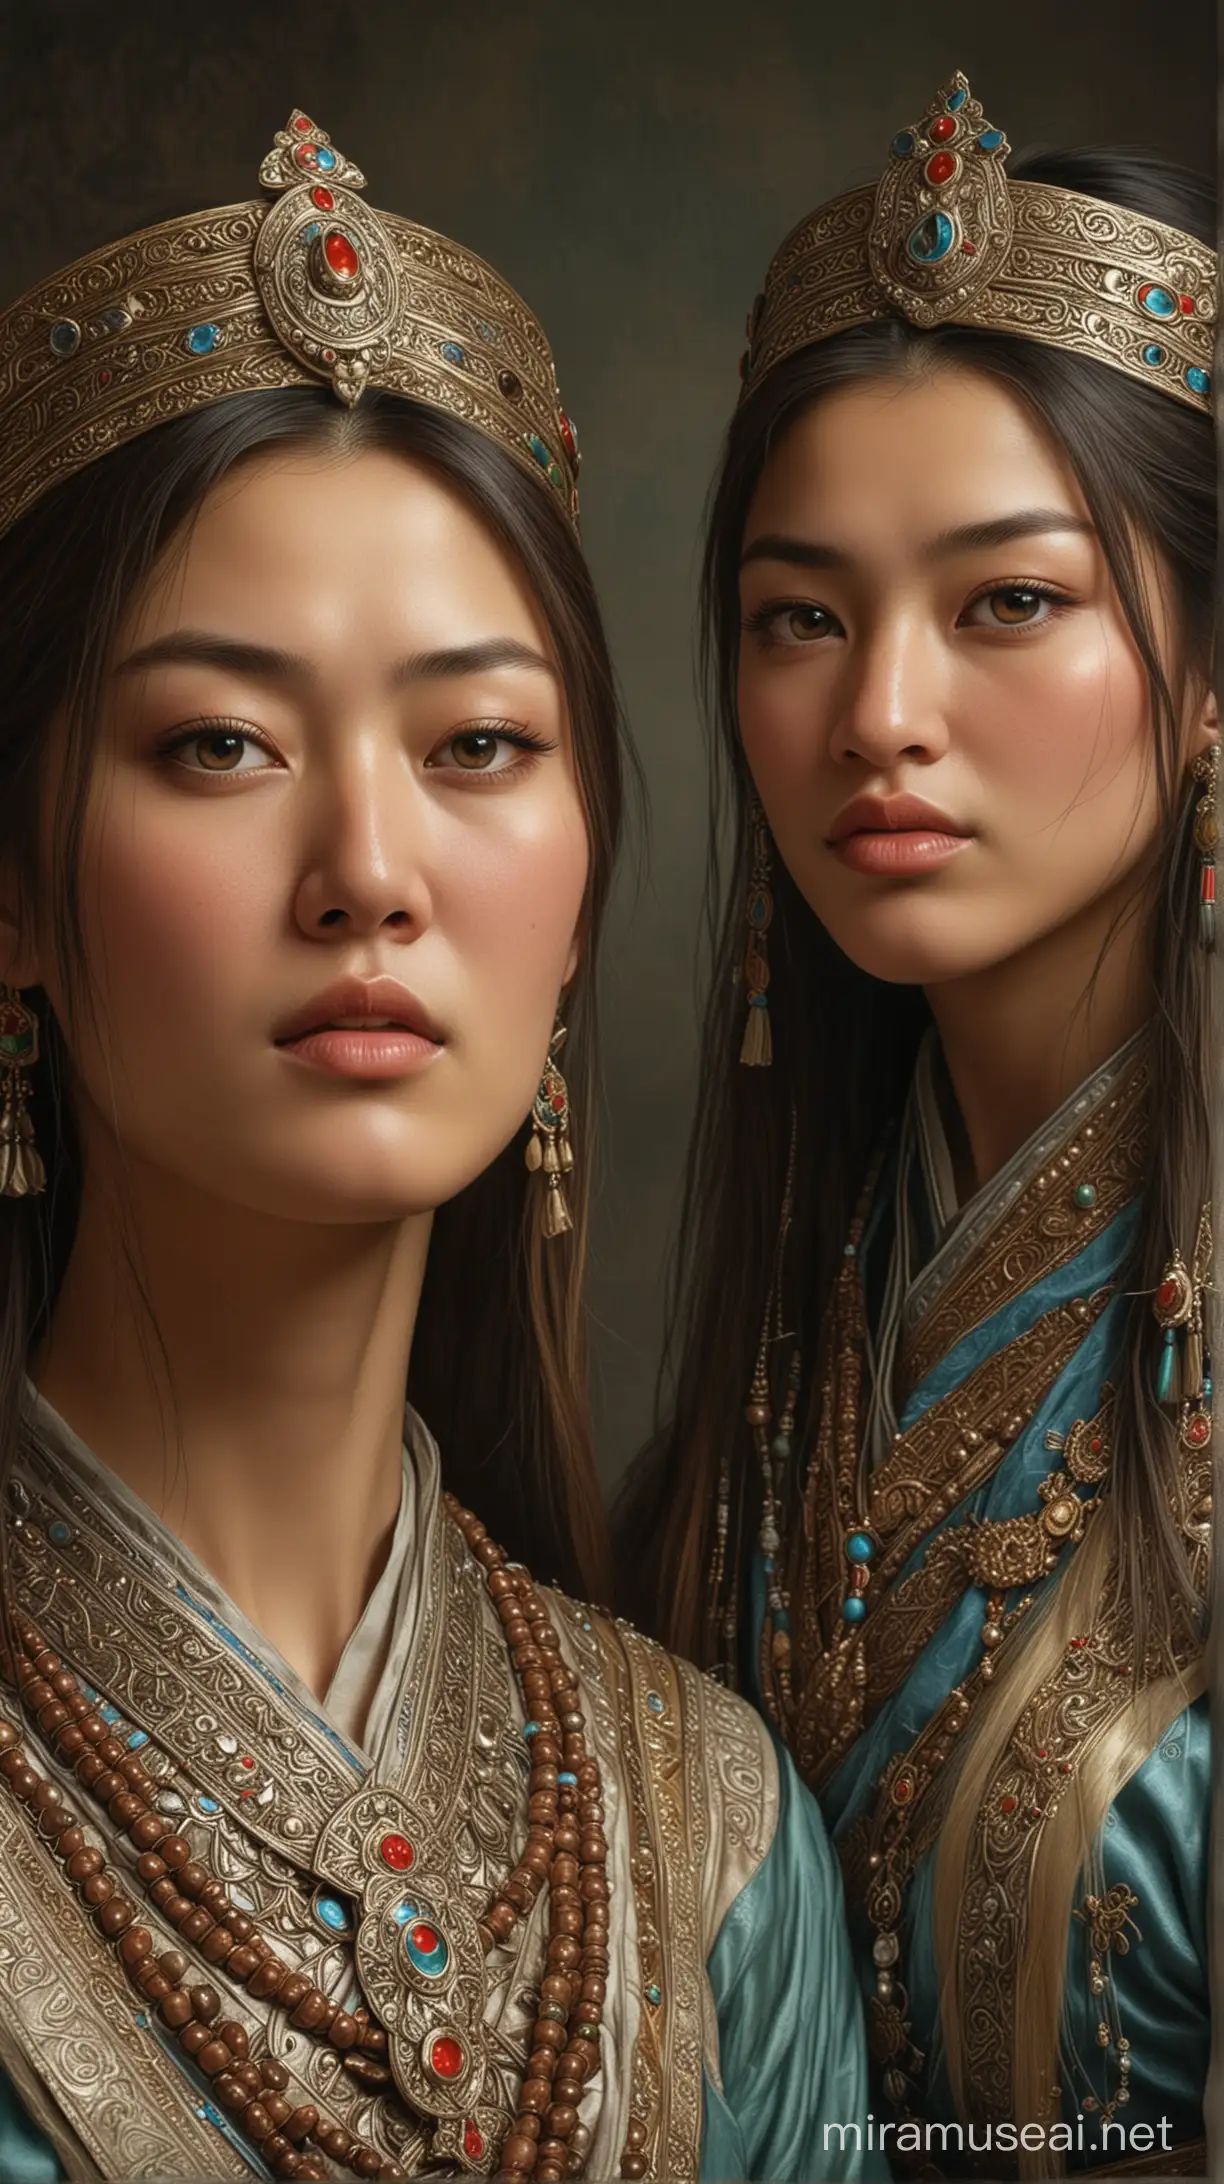 Genghis Khans Daughters Symbolic Support System in Hyper Realistic Illustration